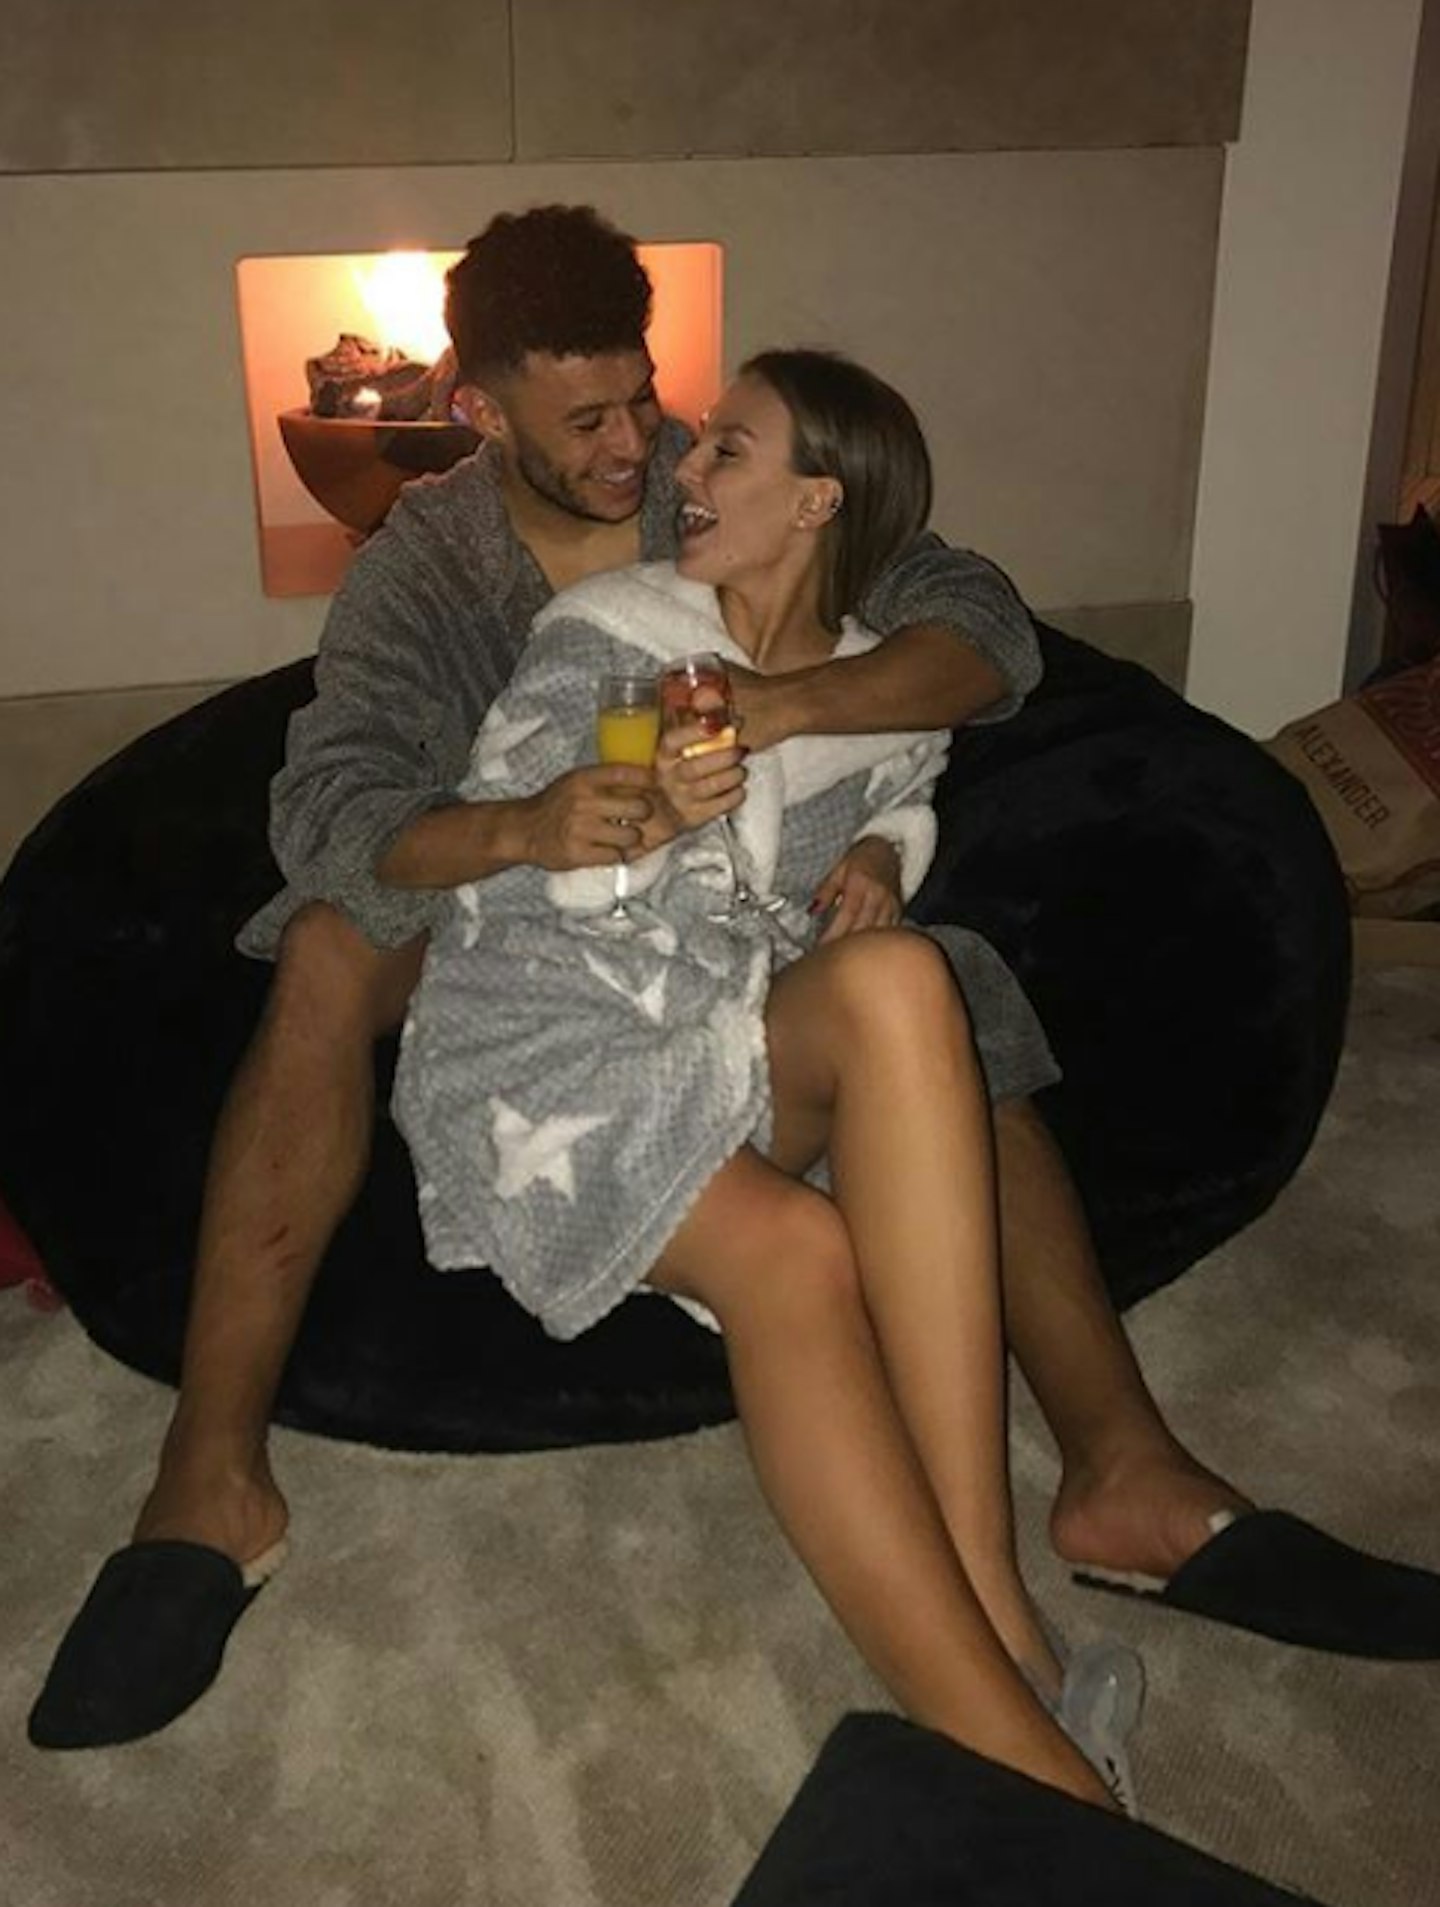 Perrie Edwards and Alex Oxlade-Chamberlain relationship timeline